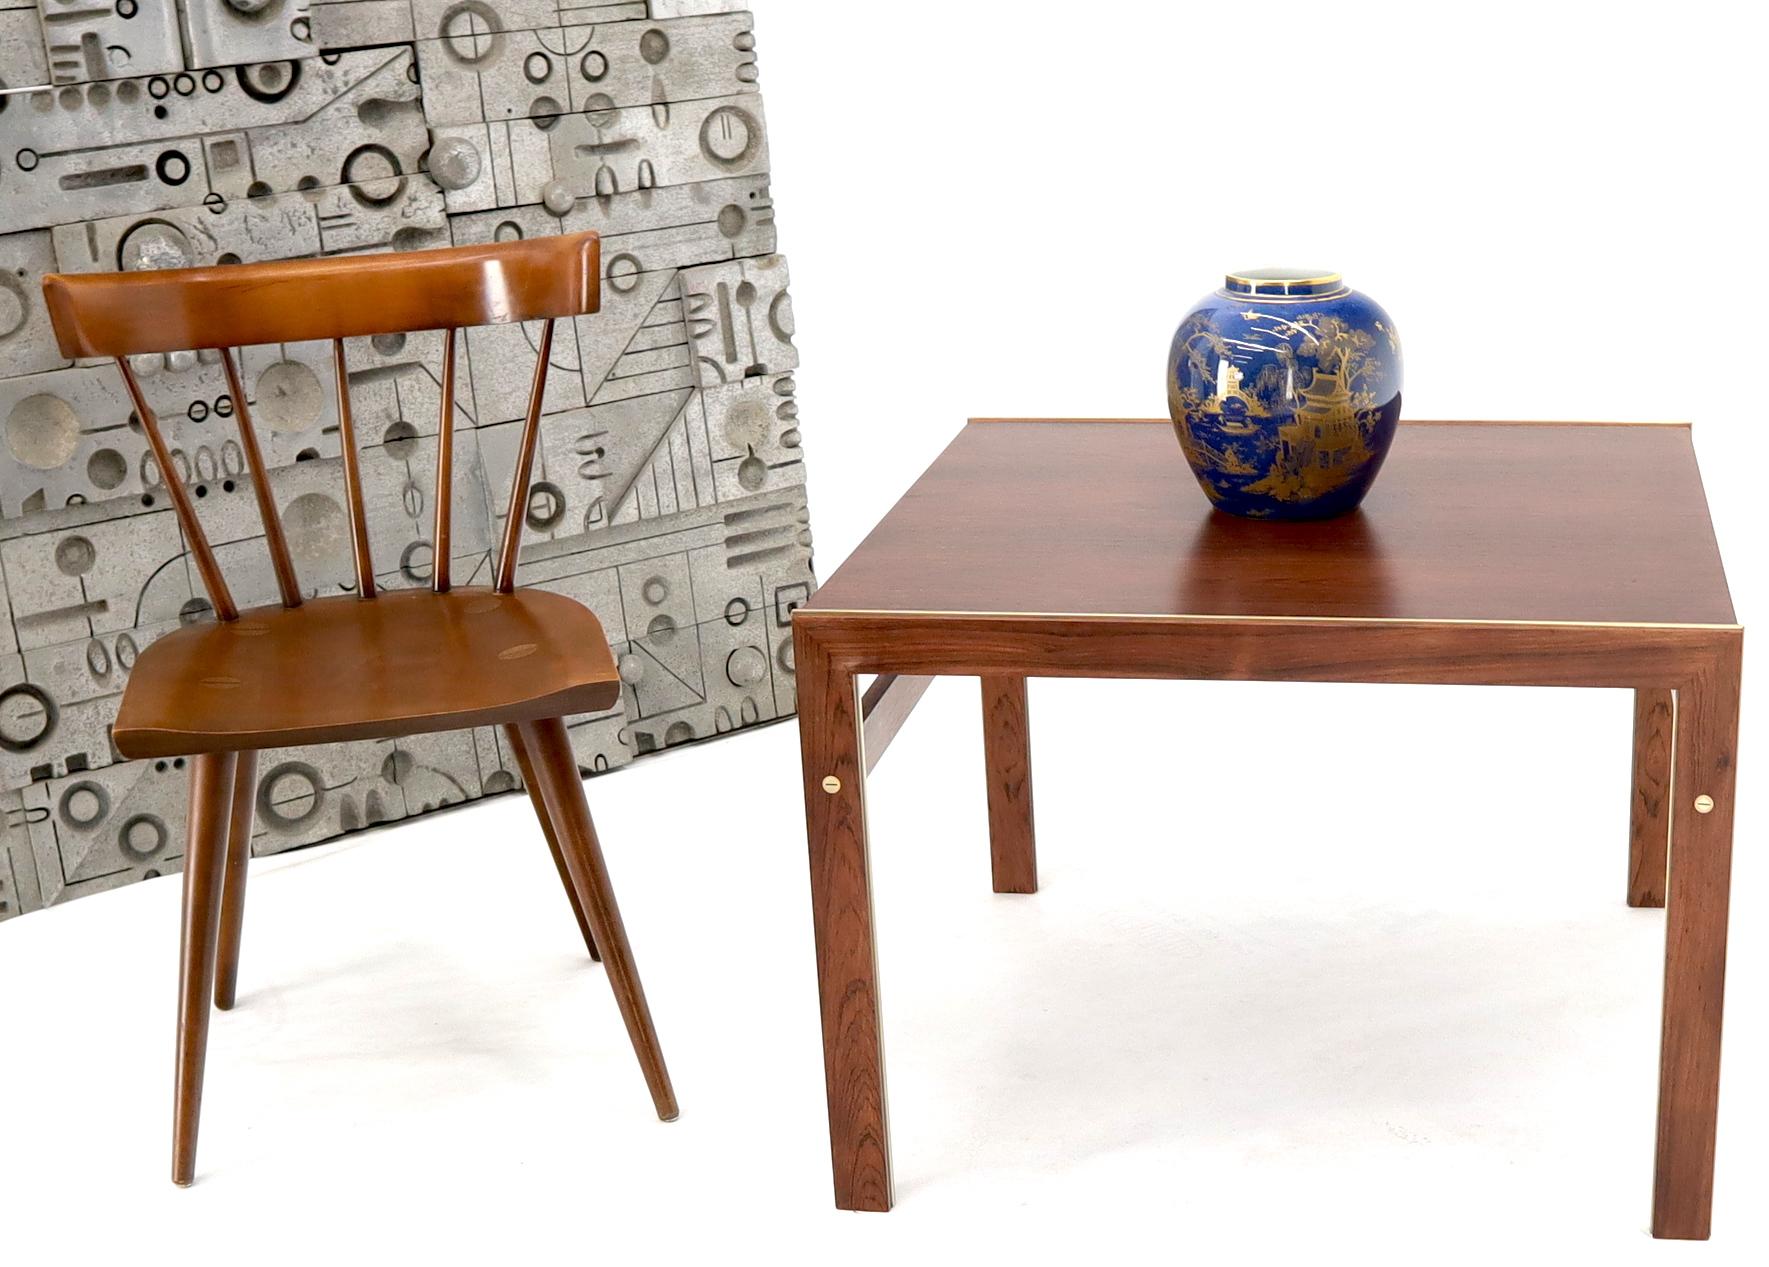 Midcentury Danish modern square rosewood occasional side end center table.
Beautiful condition with beautiful brass inlay parts.